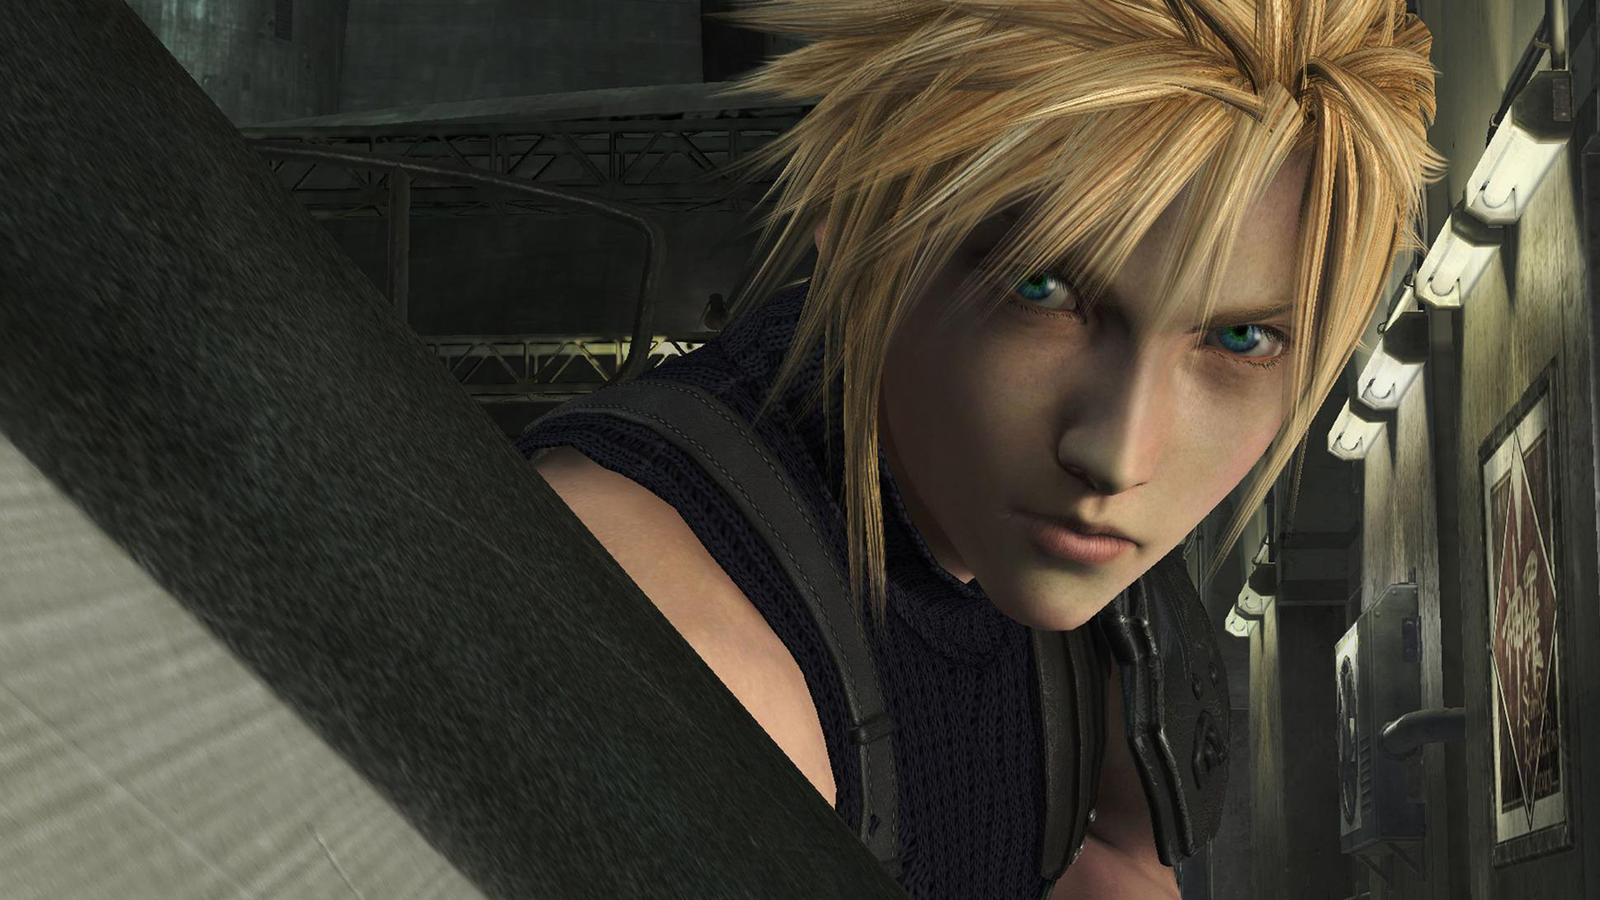 Final Fantasy 7 Remake Part 2 is planned for reveal this year, producer  confirms